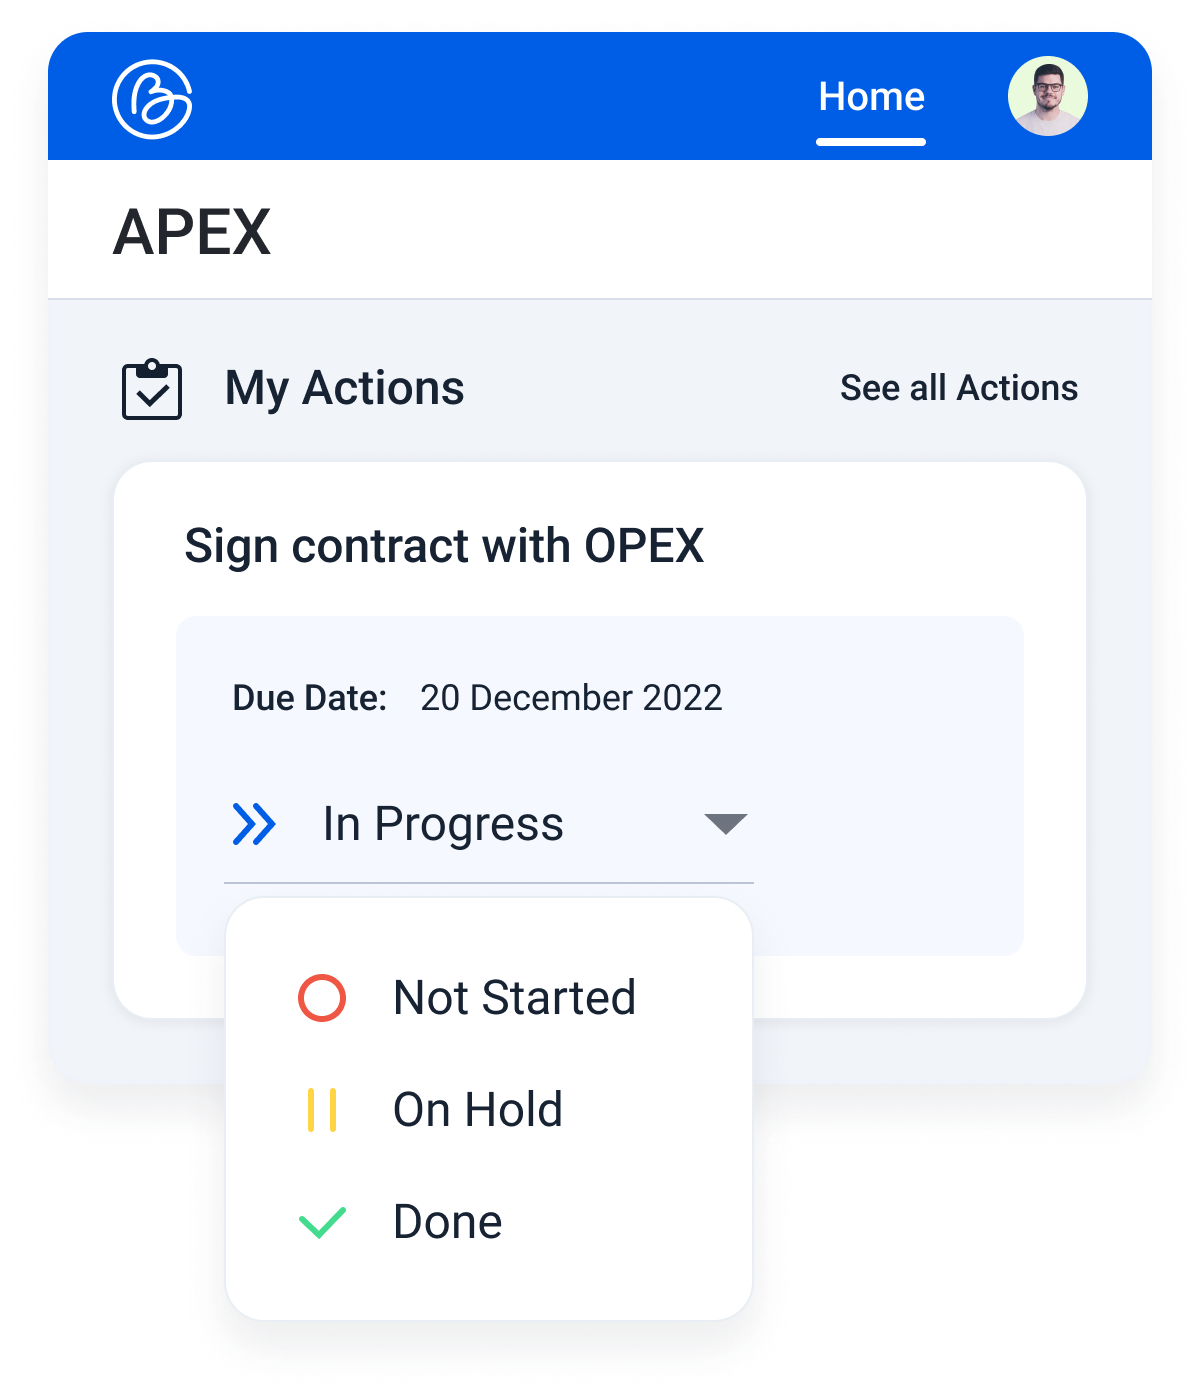 Updating the status for an action using a drop down menu to change its progress